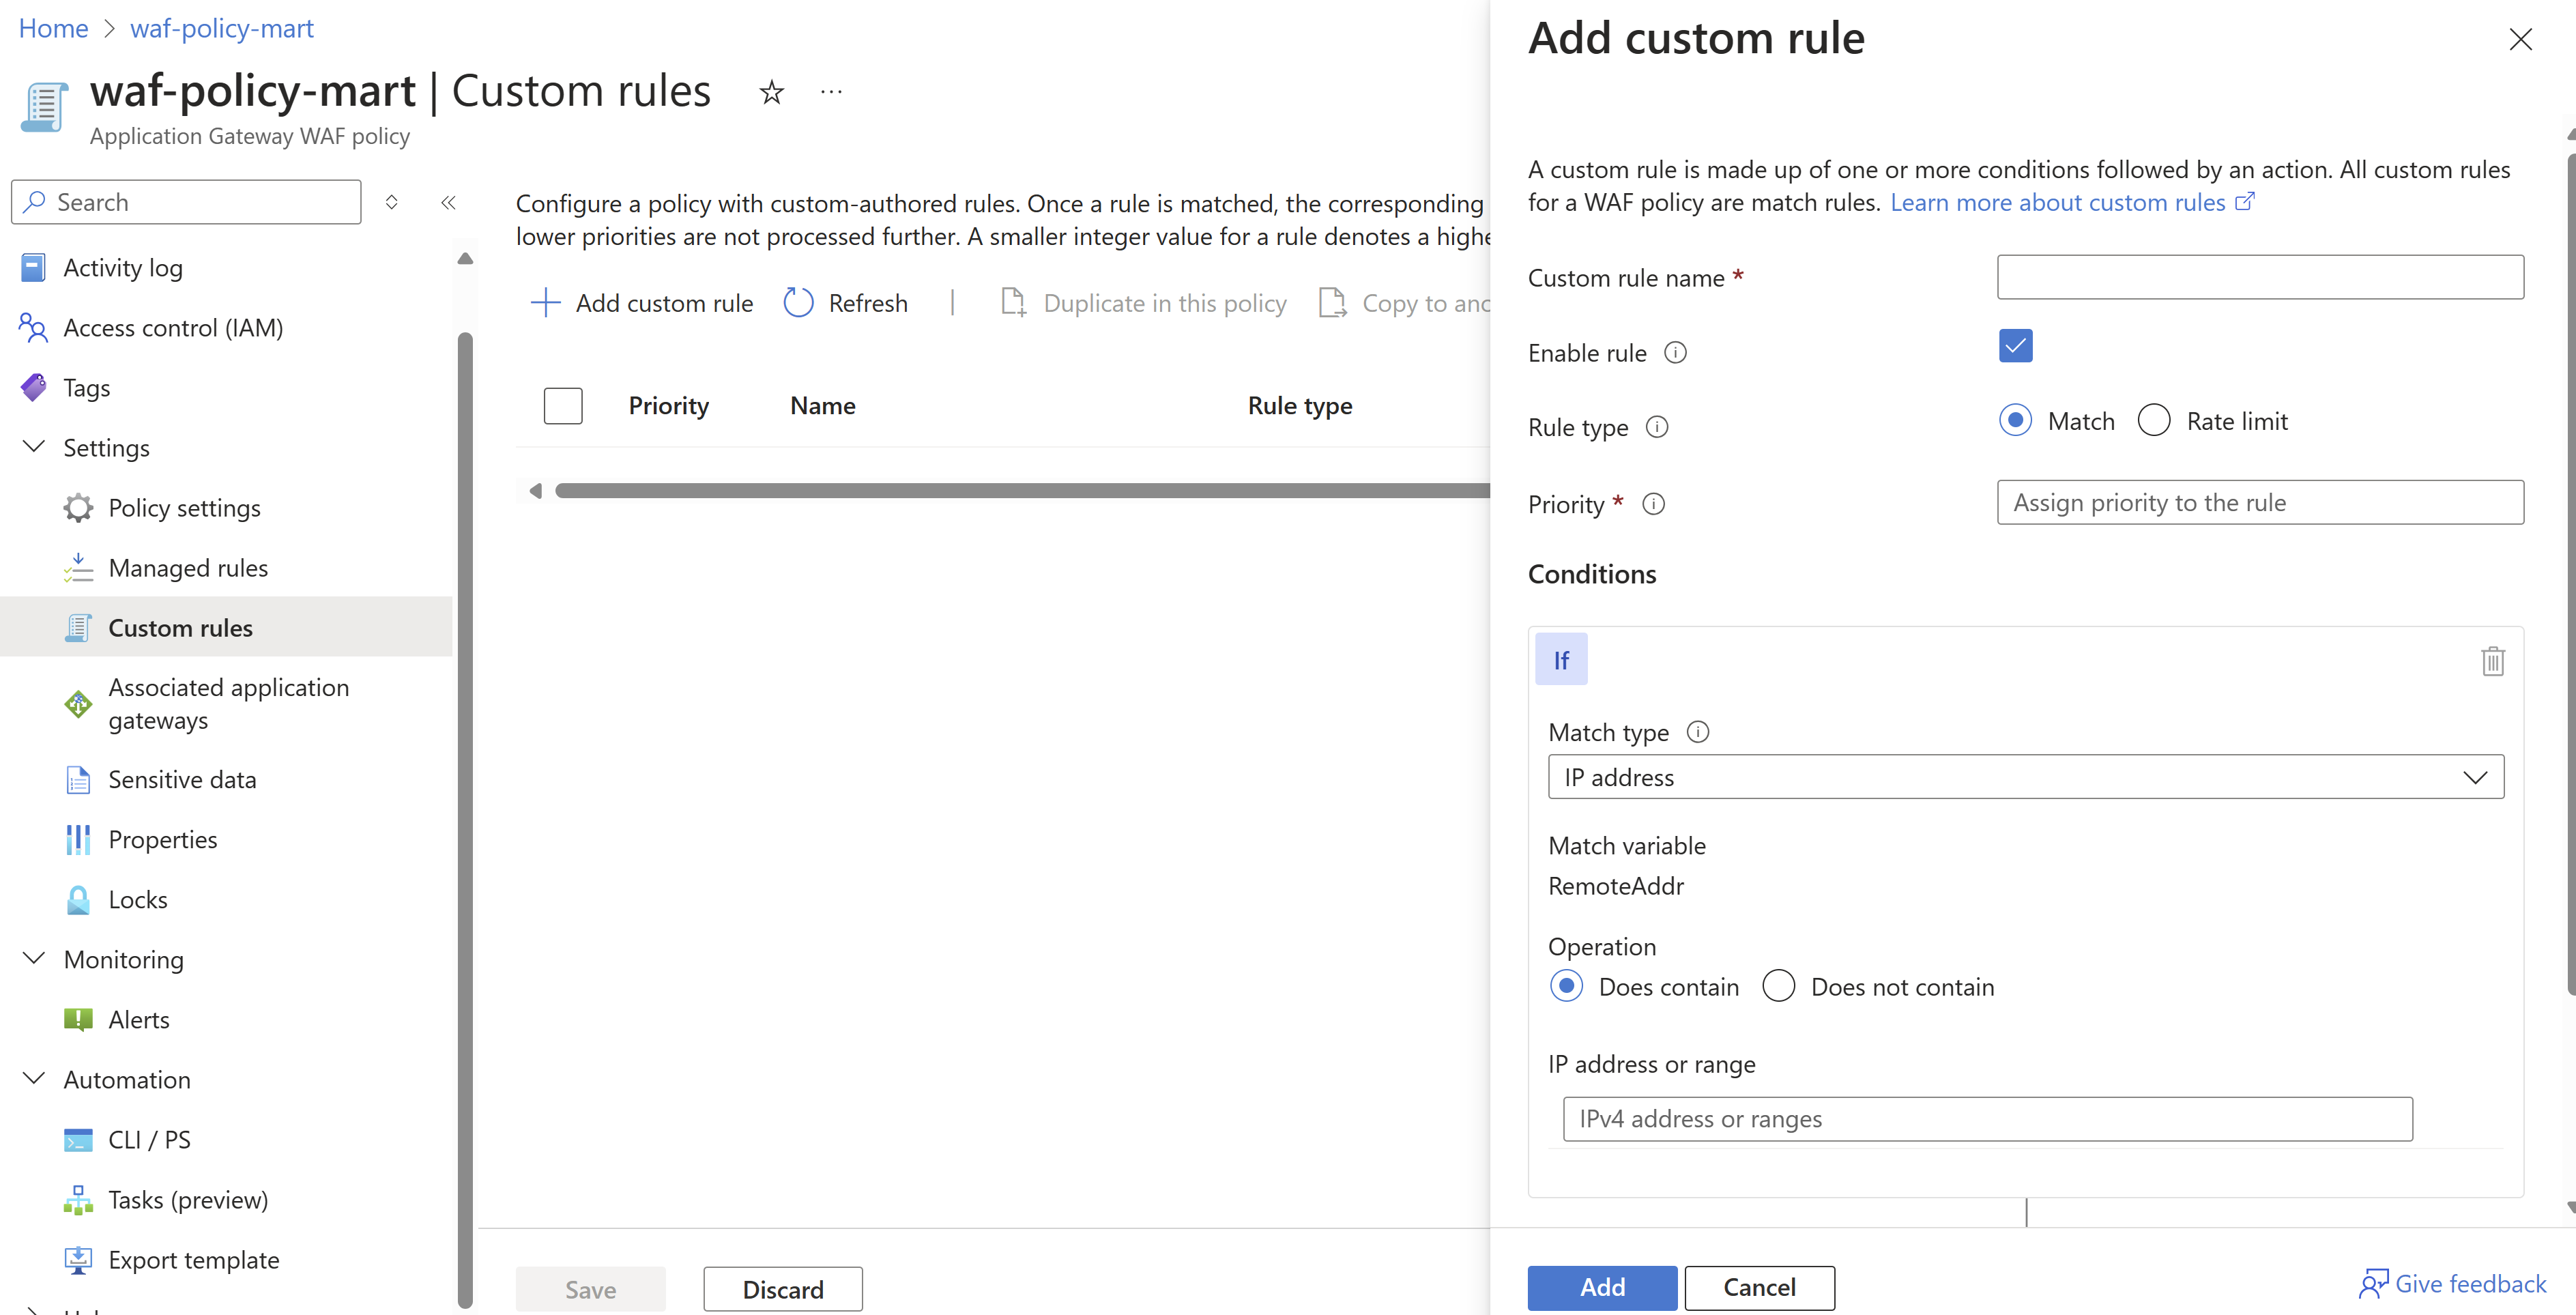 Showing custom policies of a WAF policy in the Azure Portal